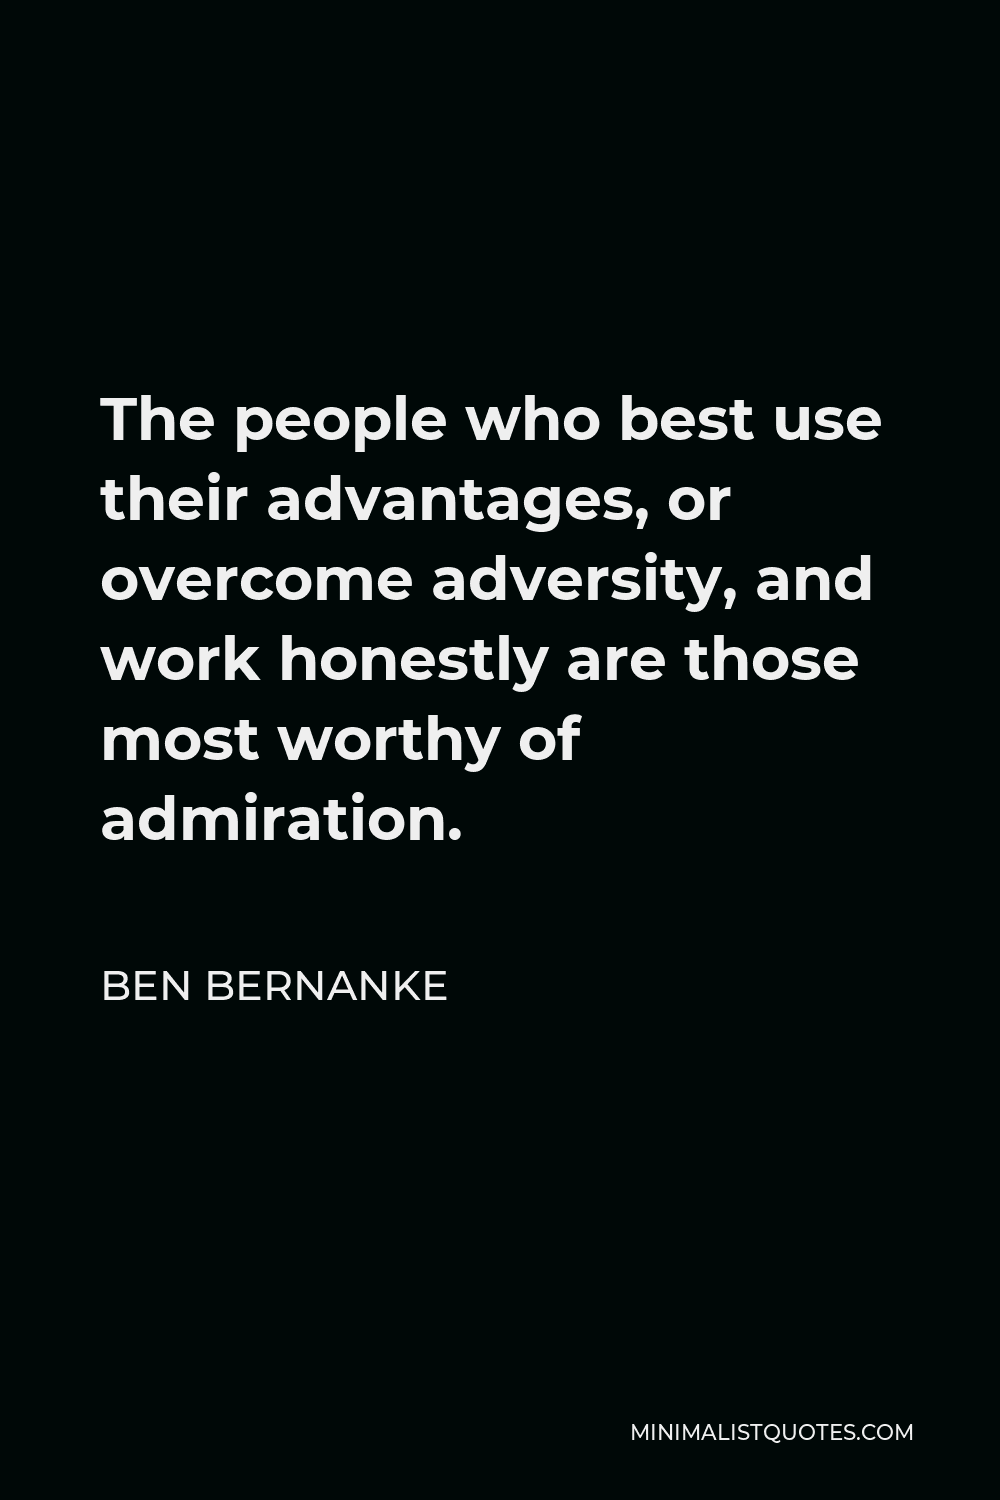 Ben Bernanke Quote - The people who best use their advantages, or overcome adversity, and work honestly are those most worthy of admiration.